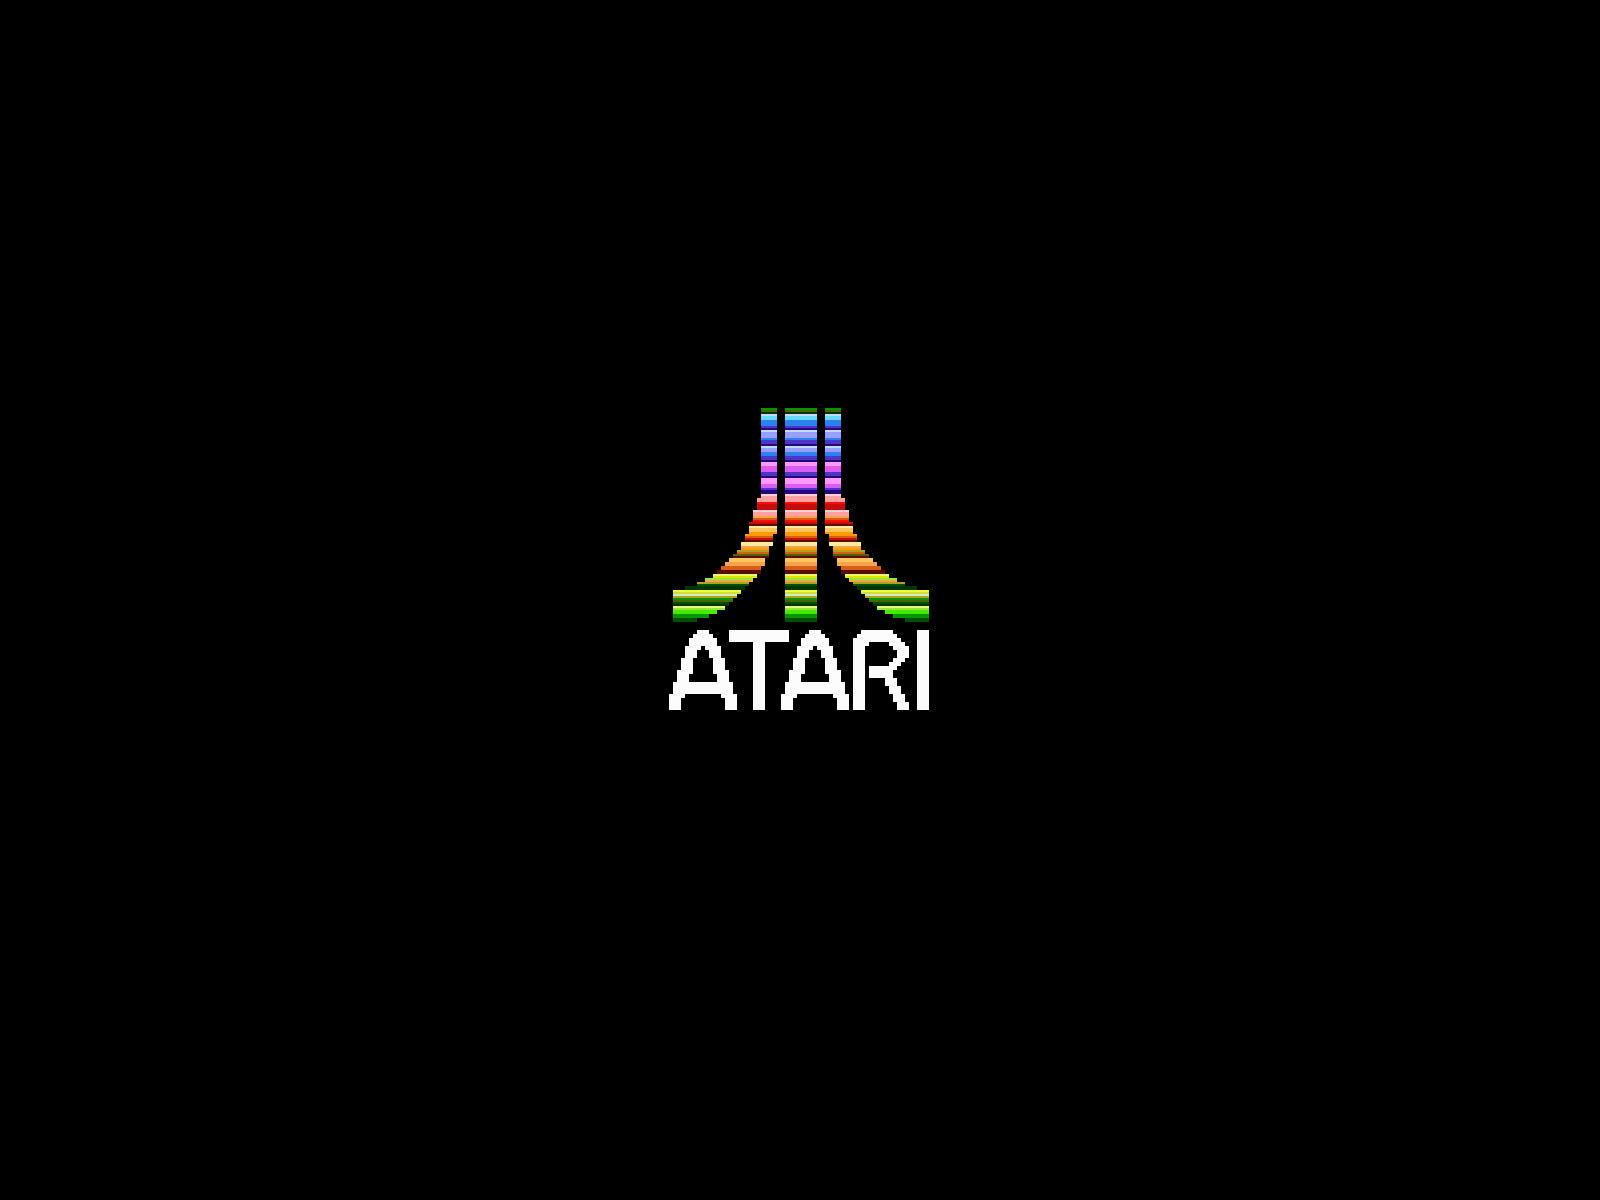 After 20 Years, Atari is Working on a Brand New Console